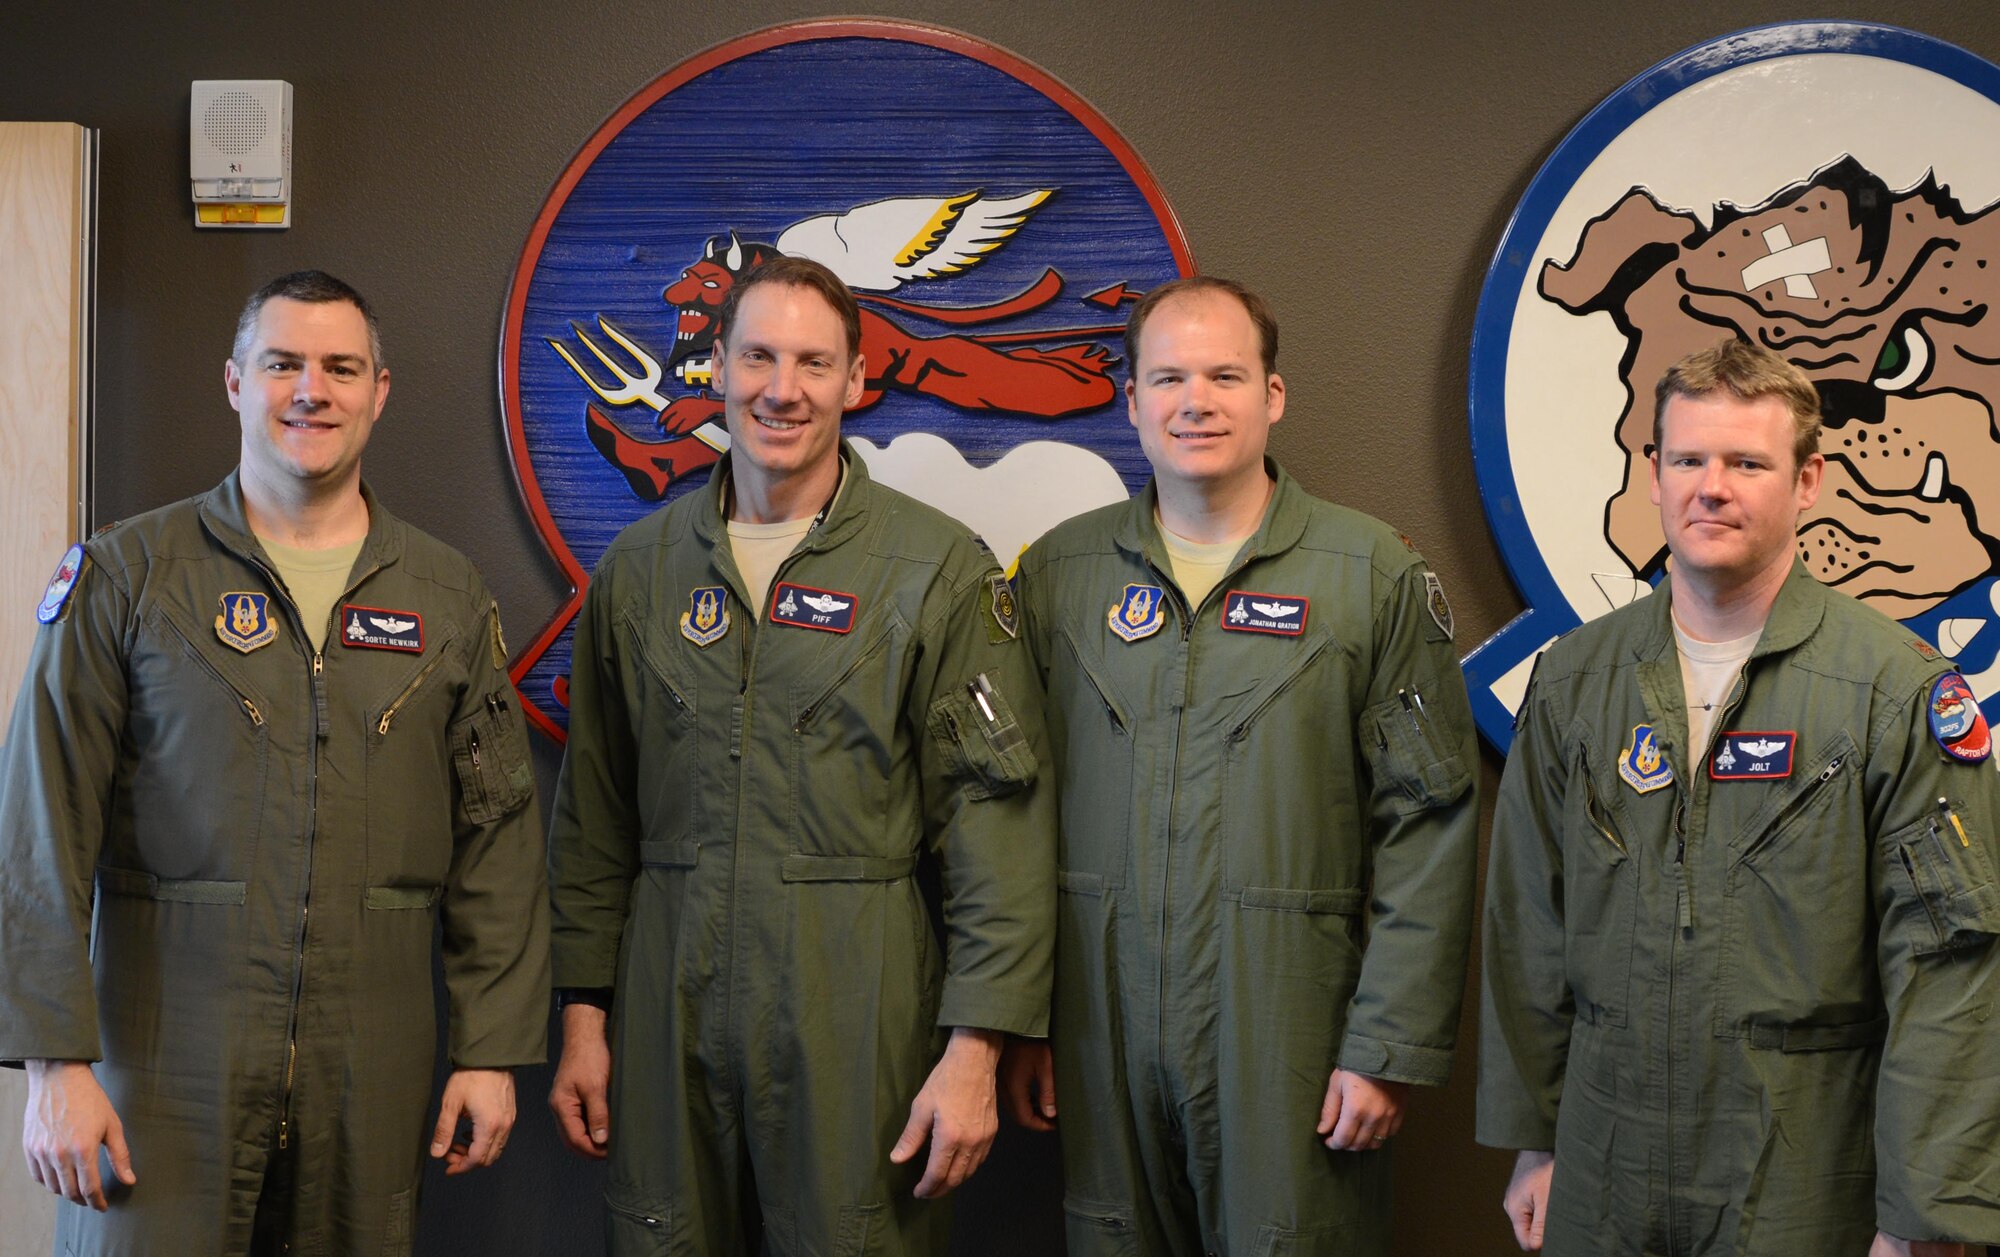 Maj. Chad Newkirk, Col. David Piffarerio, Maj. Jonathan Gration, and Maj. Ryan Pelkola, F-22 pilots from the 477th Fighter Group, are interviewed by a local television station prior to flying the most experienced four-ship flight in the history of the F-22. (U.S. Air Force Photo/ Tech. Sgt. Dana Rosso)